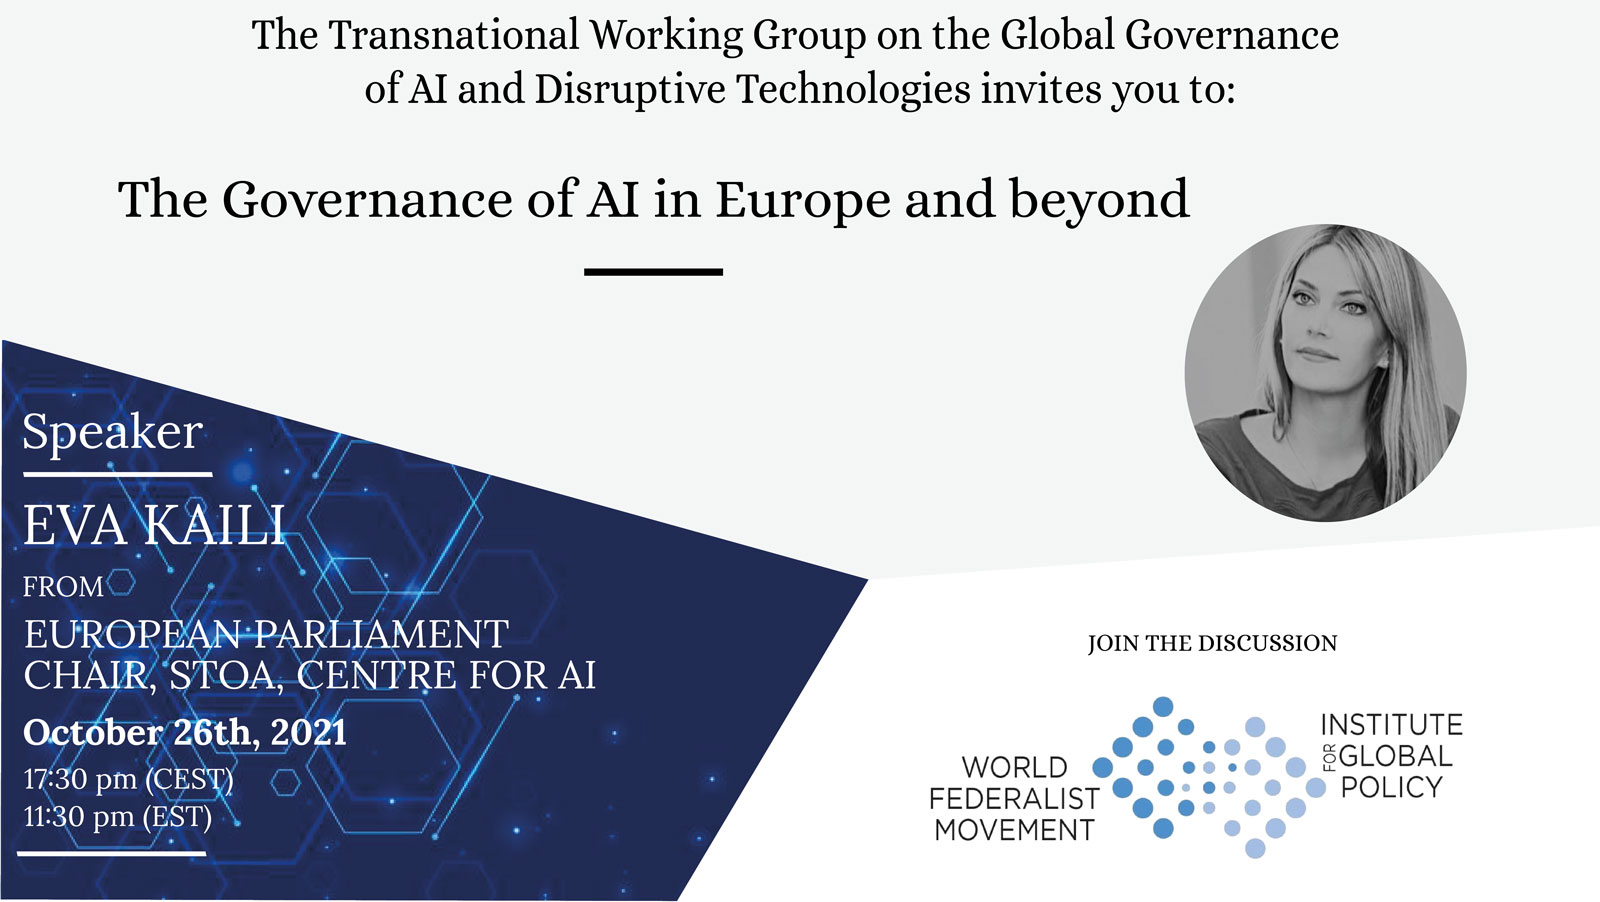 WFM/IGP The Governance of AI in Europe and Beyond